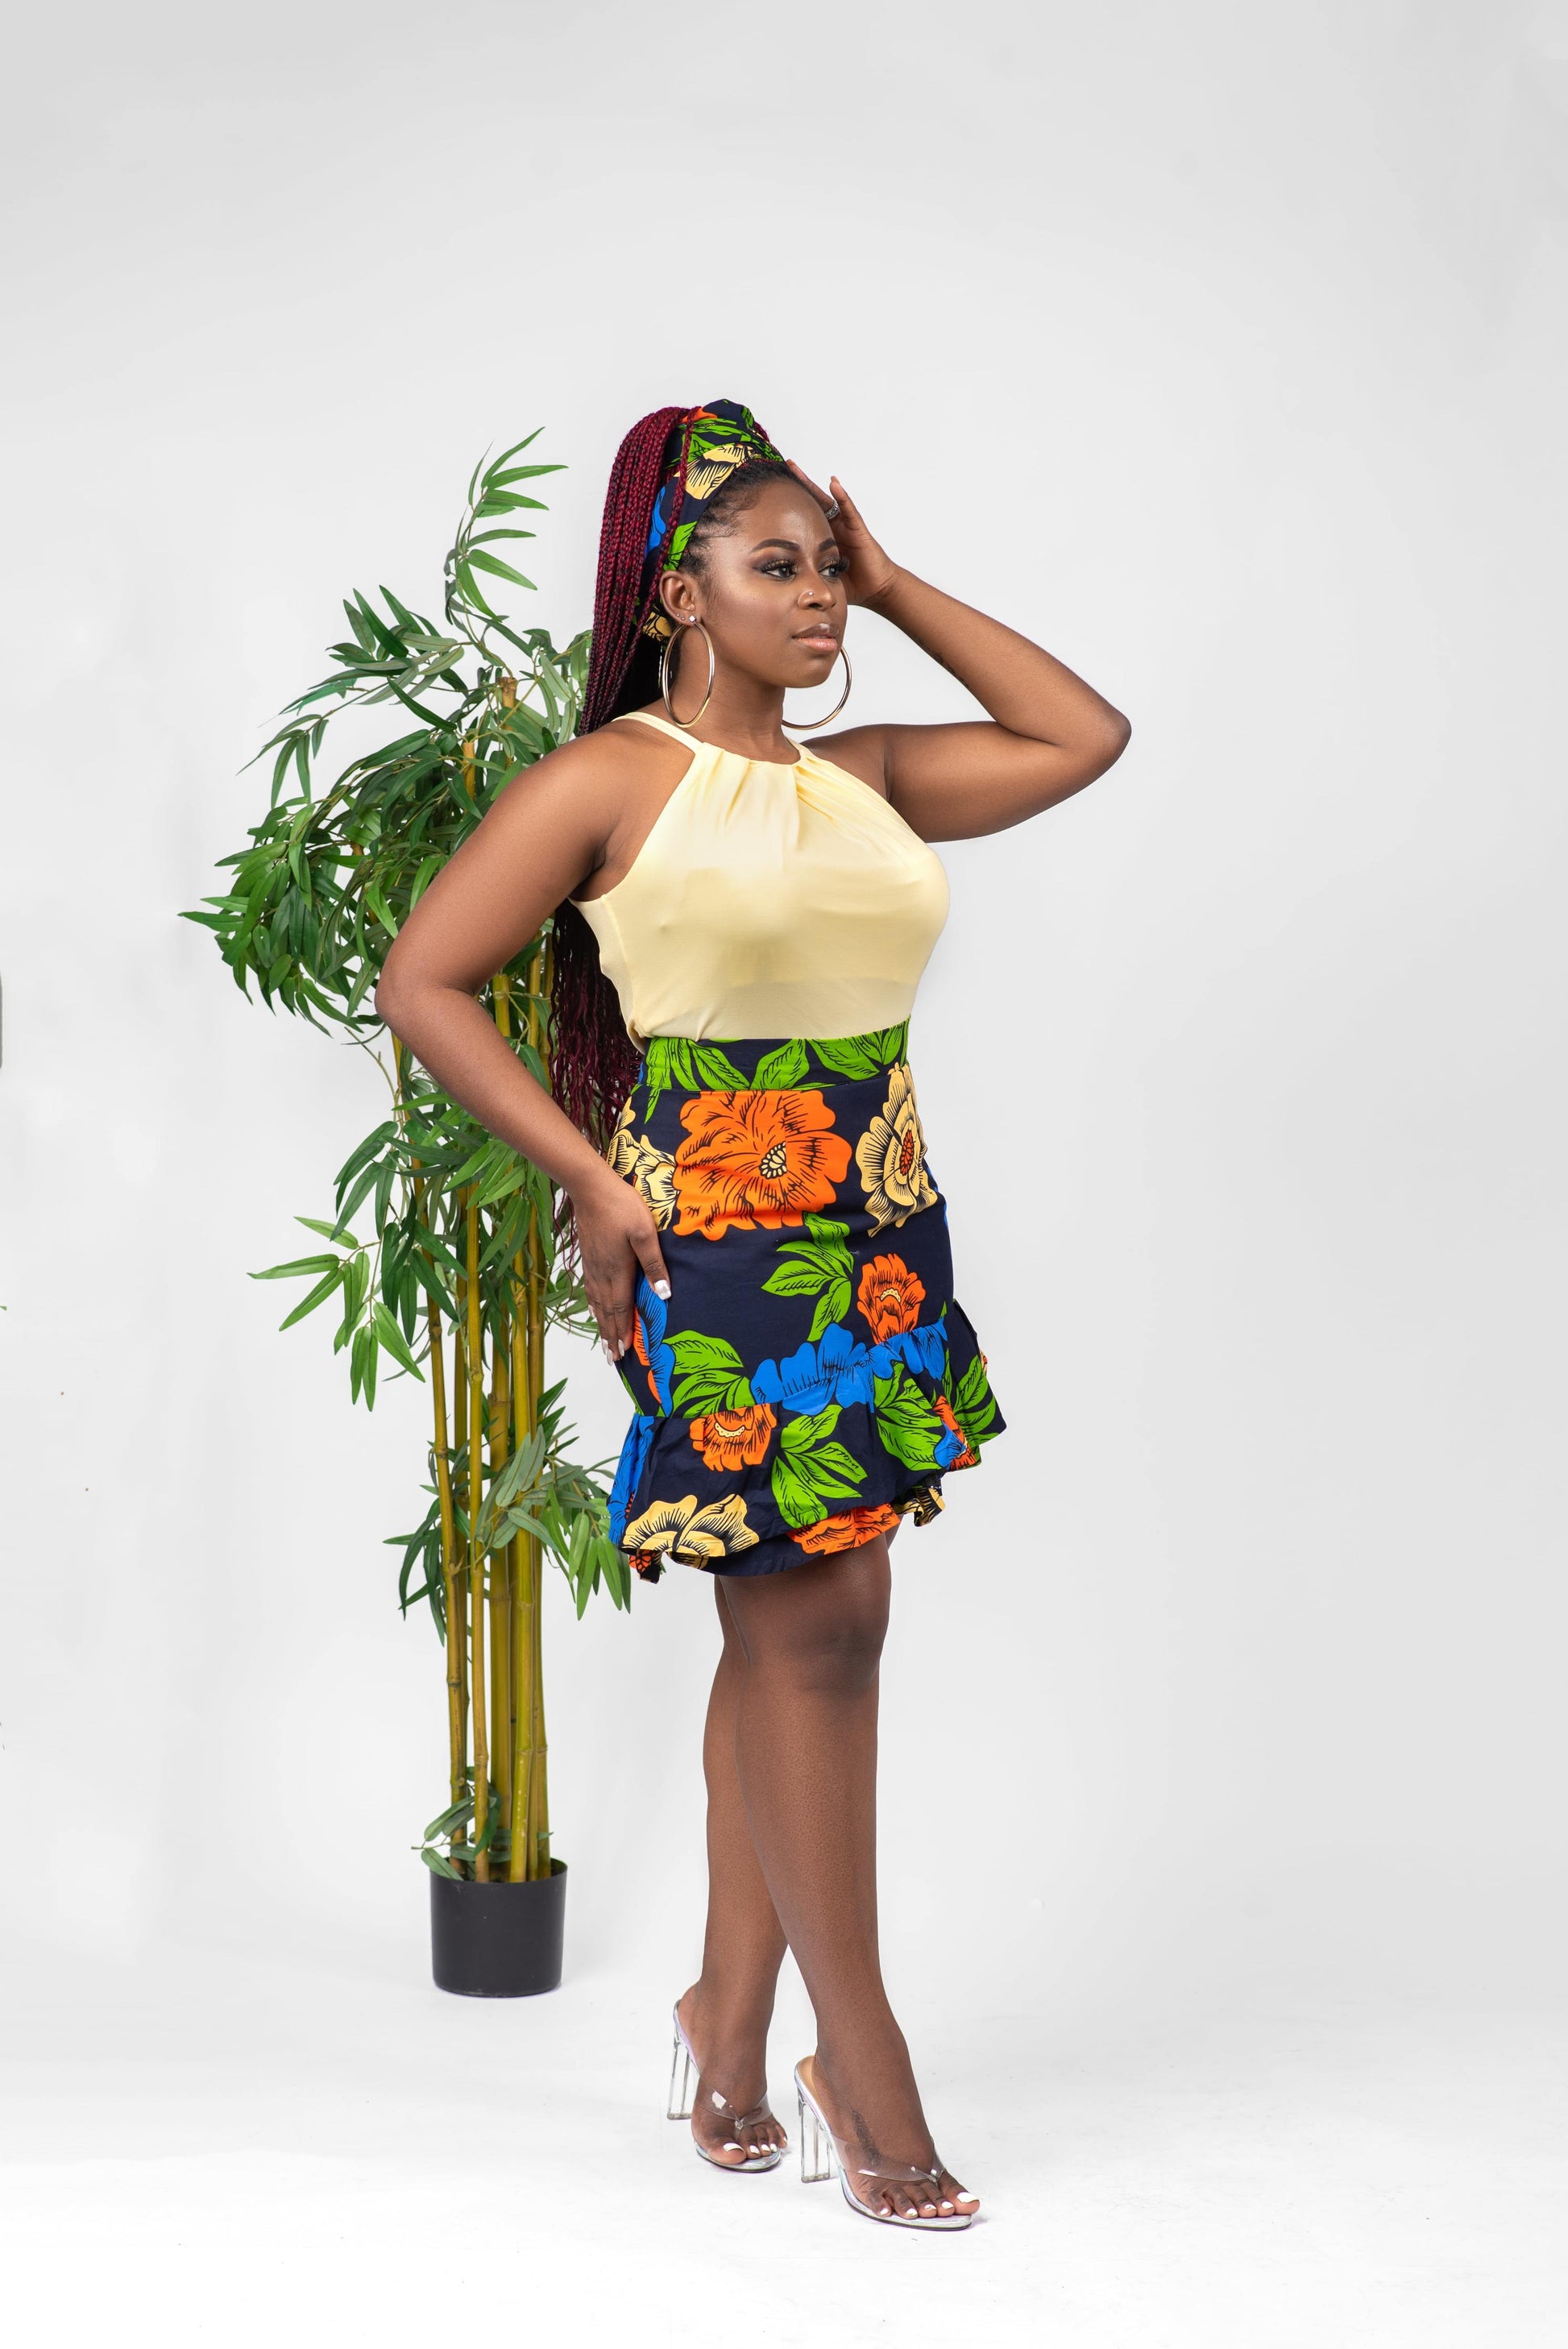 This African print skirt is Asymmetrical and features ruffles at the bottom. The asymmetrical hemline adds an element of interest, and the ruffles are fun and flirty. This skirt is perfect for women who want to stand out and be unique.   Skirt is named after the Igbo ethnic group (from Nigeria) dance style; Atilogwu.  Ankara skirt